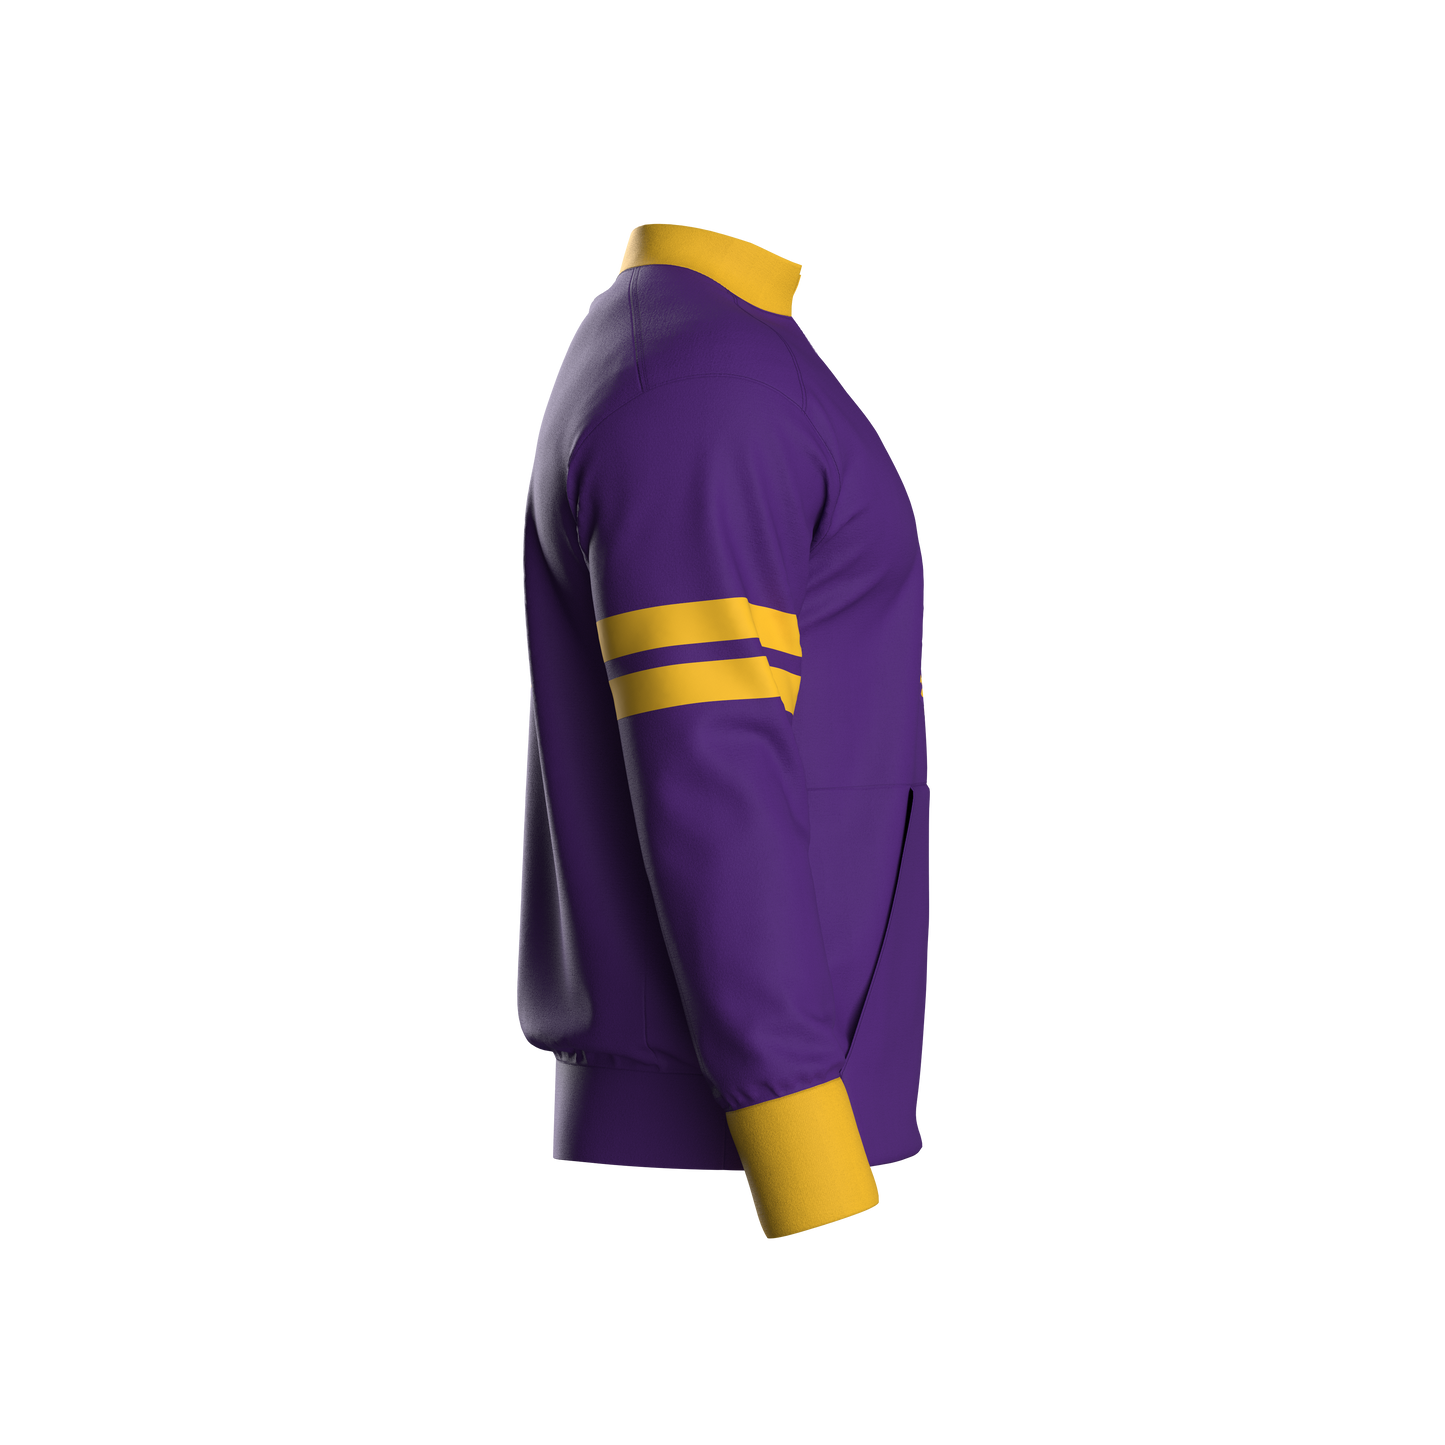 LSU Home Pullover (youth)